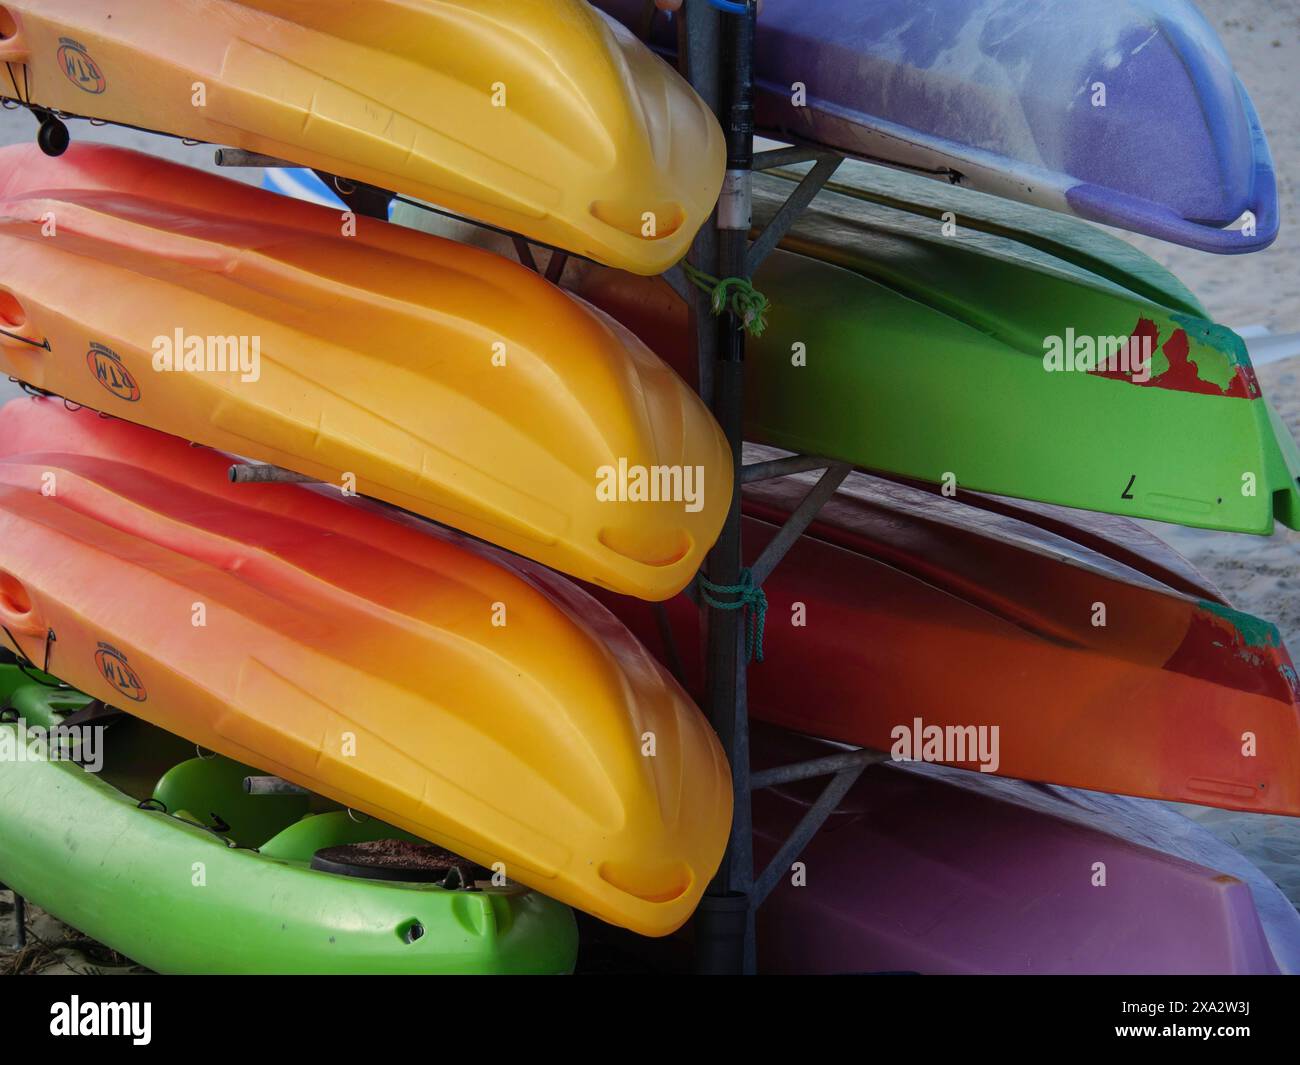 Colourful kayaks are stacked on top of each other and stored on a beach, Baltrum Germany Stock Photo